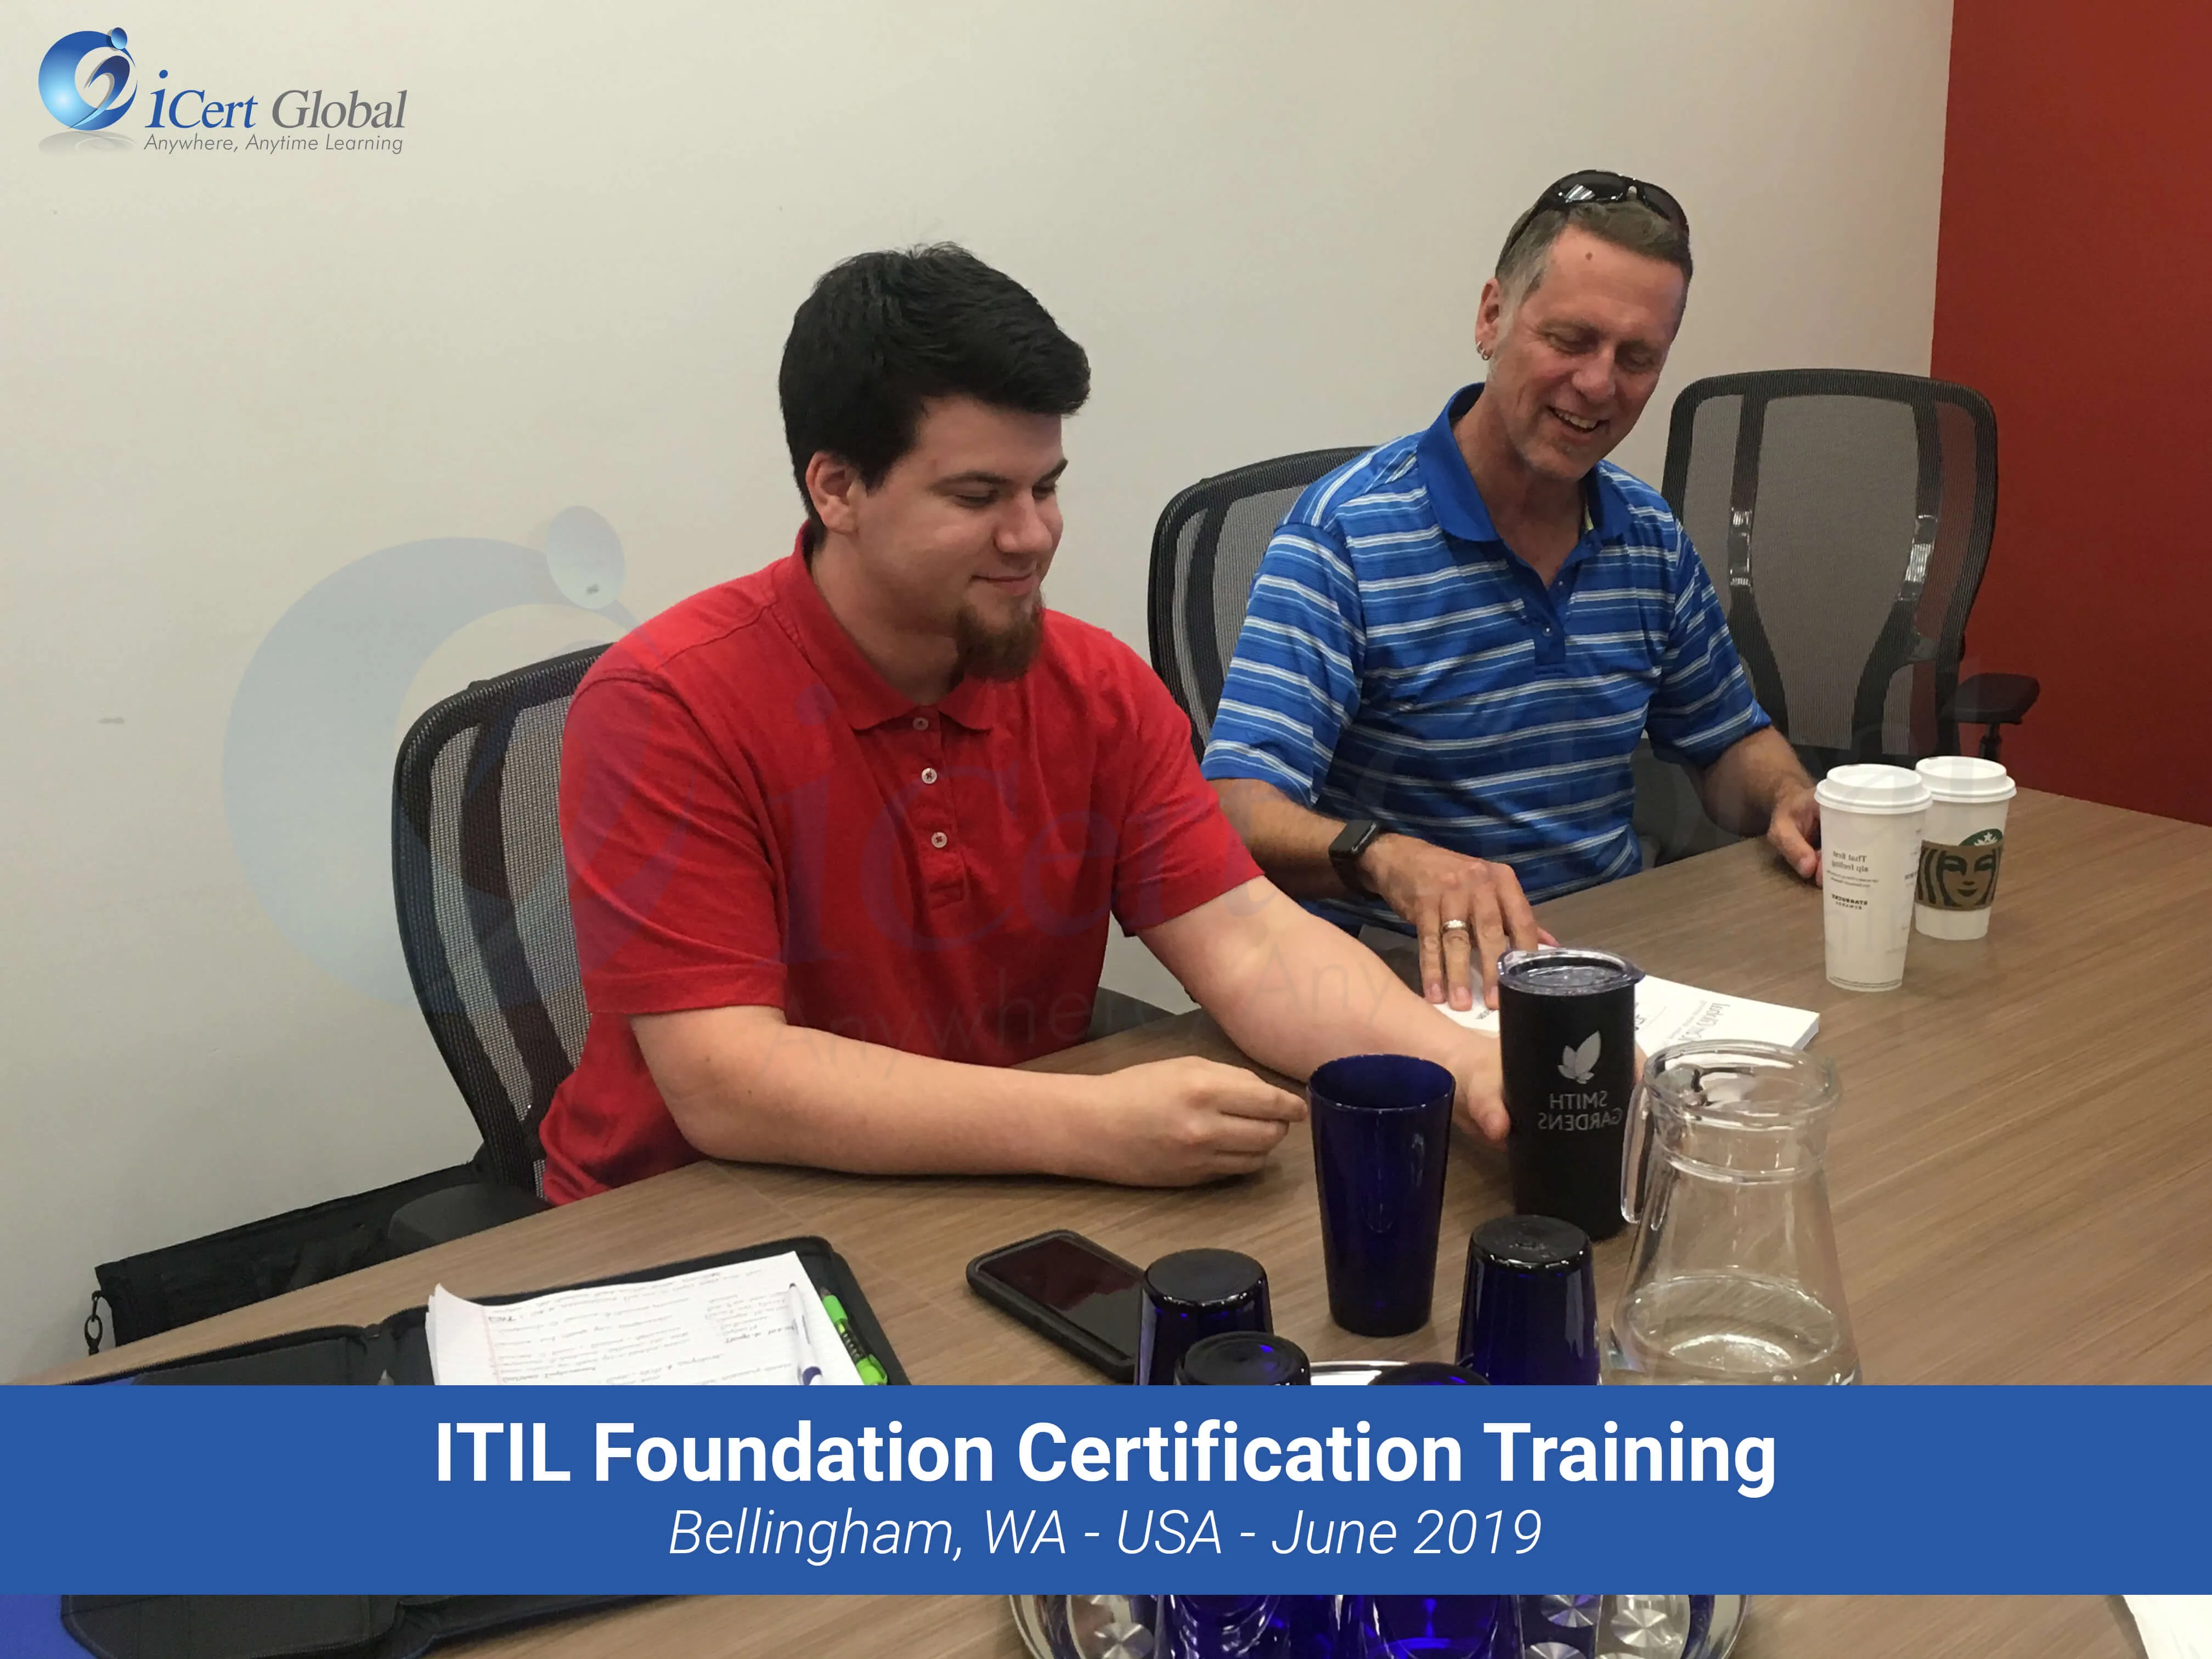 ITIL Foundation Certification Training Classroom Course in Bellingham, WA - June 2019